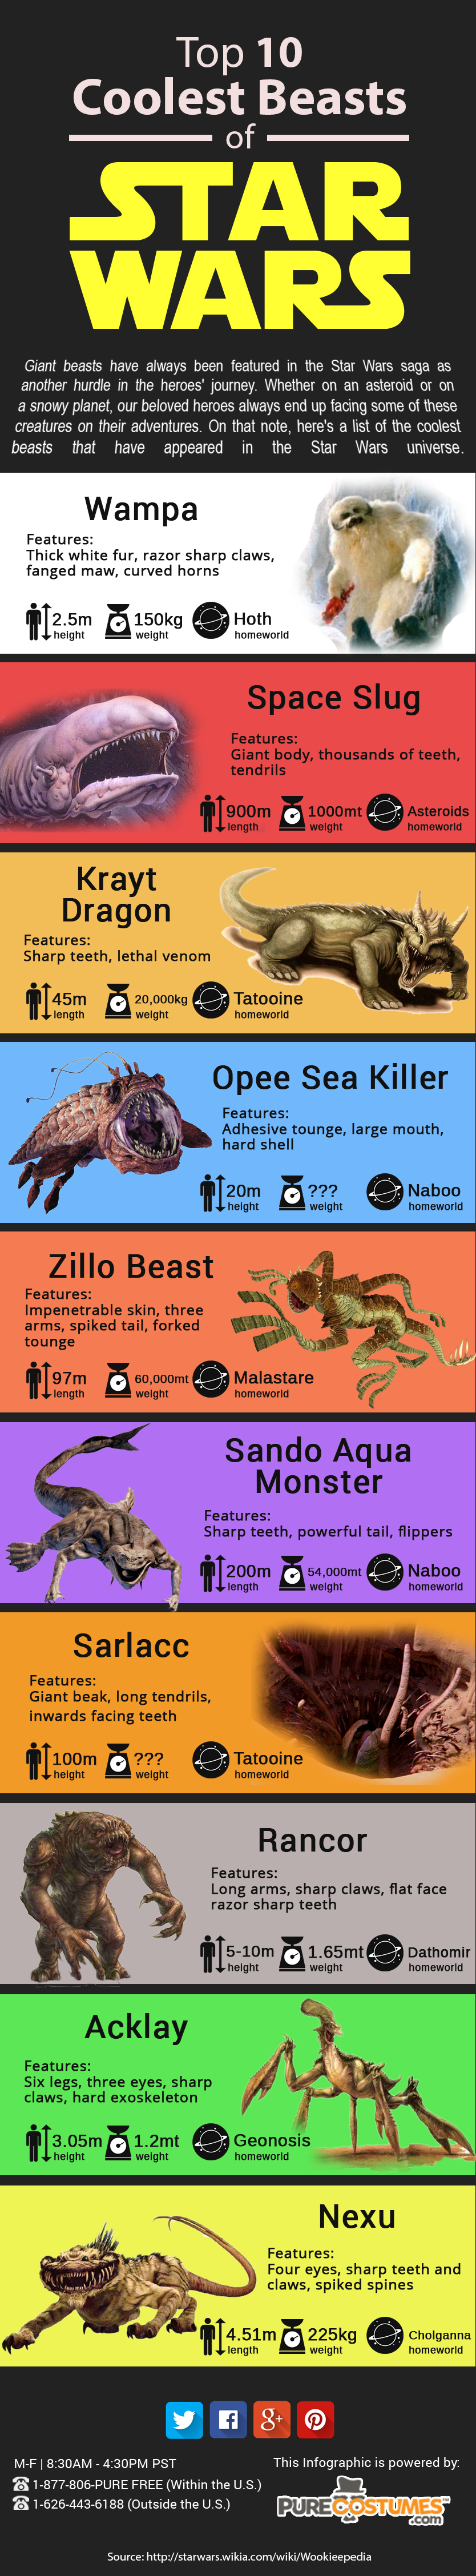 Star Wars Beasts Infographic